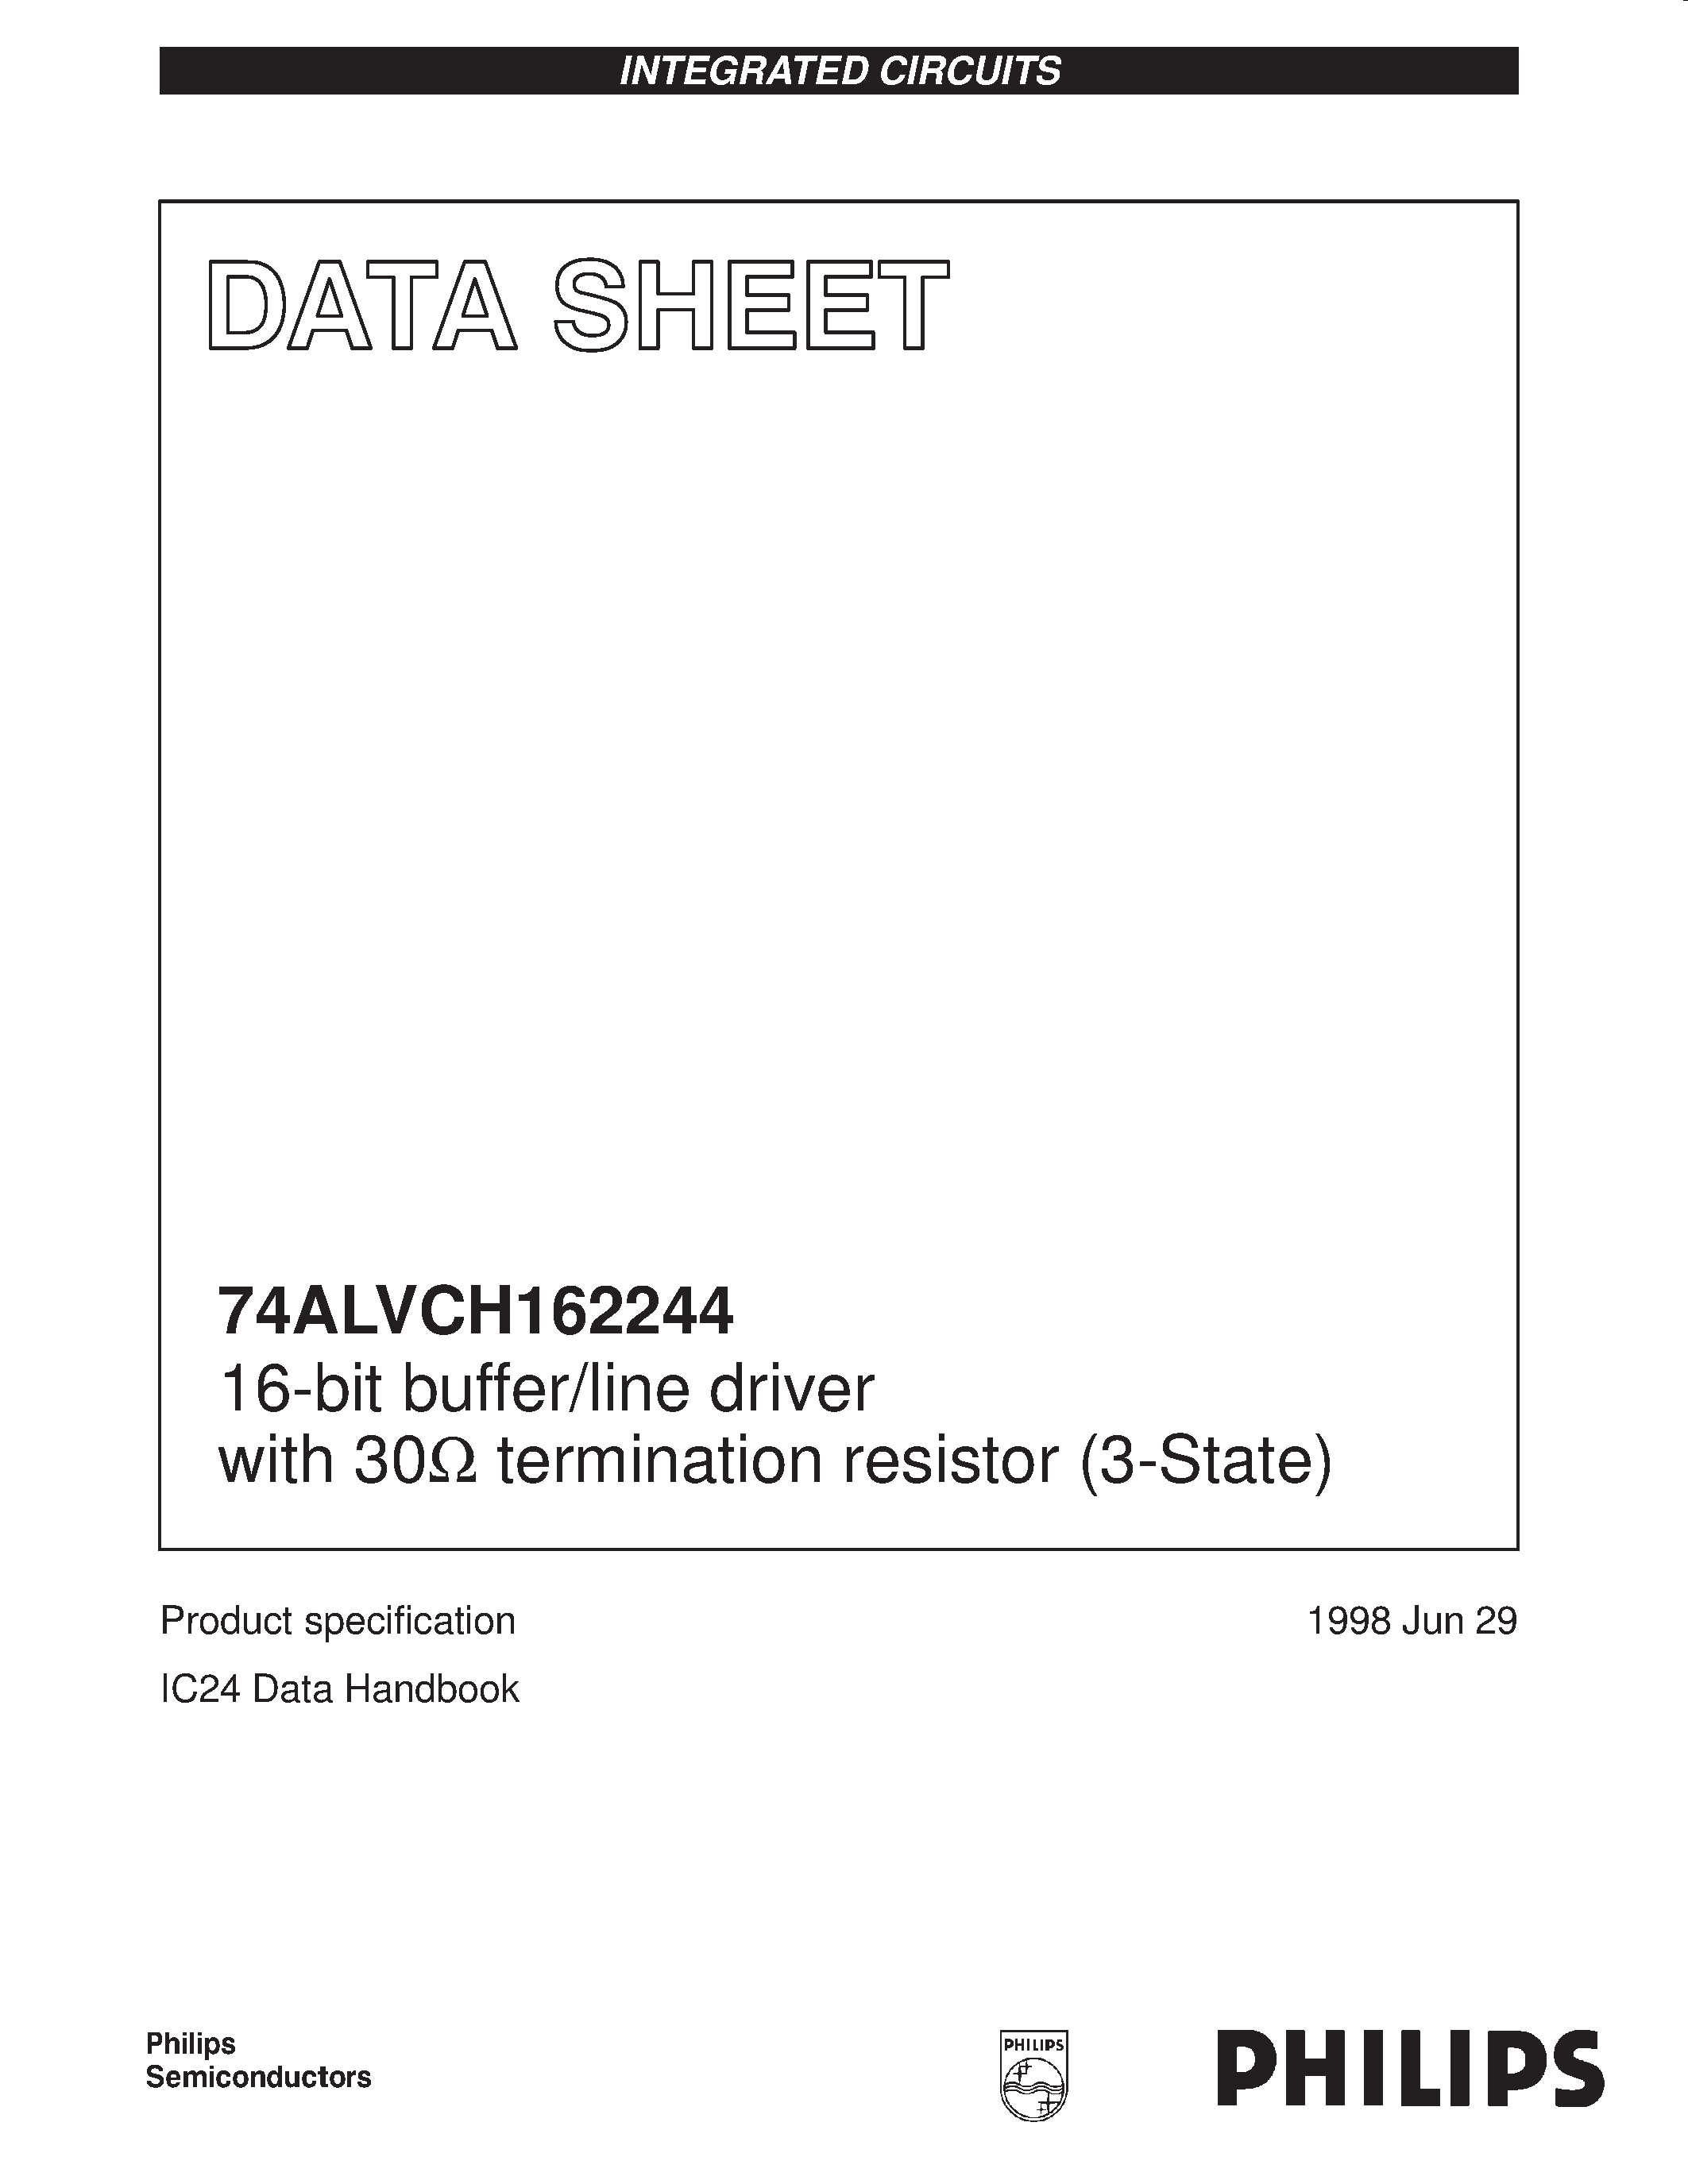 Datasheet 74ALVCH162244DGG - 16-bit buffer/line driver with 30ohm termination resistor 3-State page 1